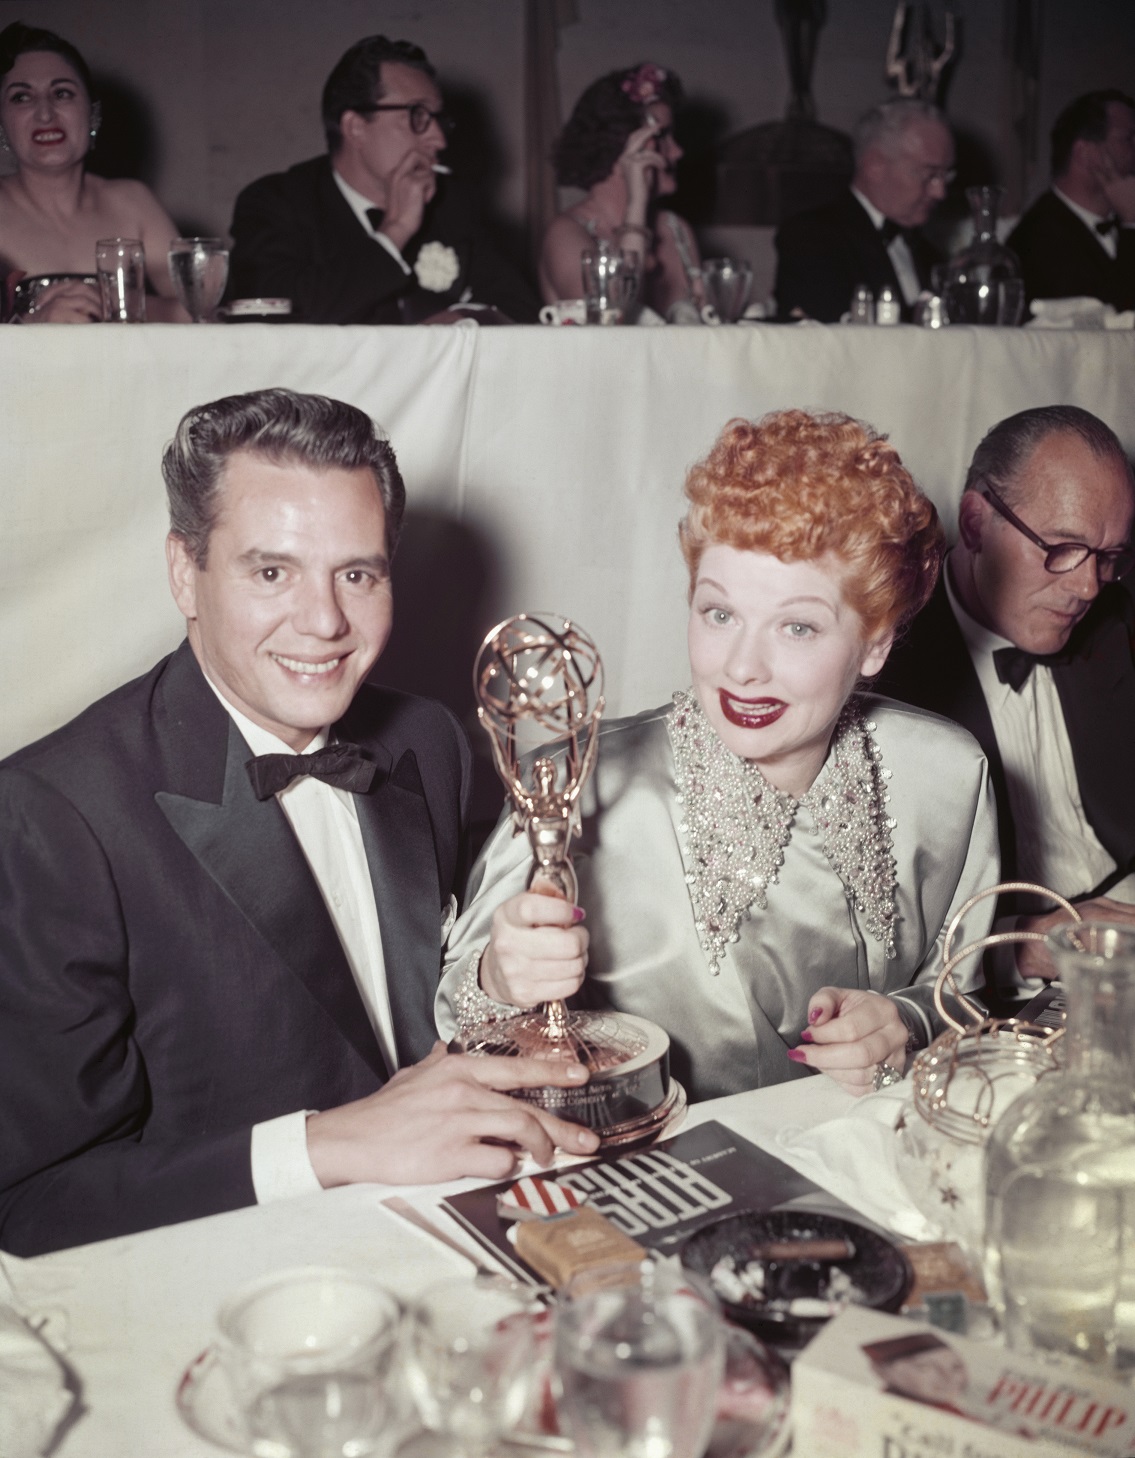 American actress Lucille Ball (1911 - 1989) and her husband Desi Arnaz (1917 - 1986) with their Academy of Television Arts & Sciences (ATAS) trophies at the Emmy Awards, USA, 5th February 1953. Ball had won Best Comedienne for her role in the series 'I Love Lucy' and the series itself had won Best Situation Comedy. (Photo by FPG/Getty Images)